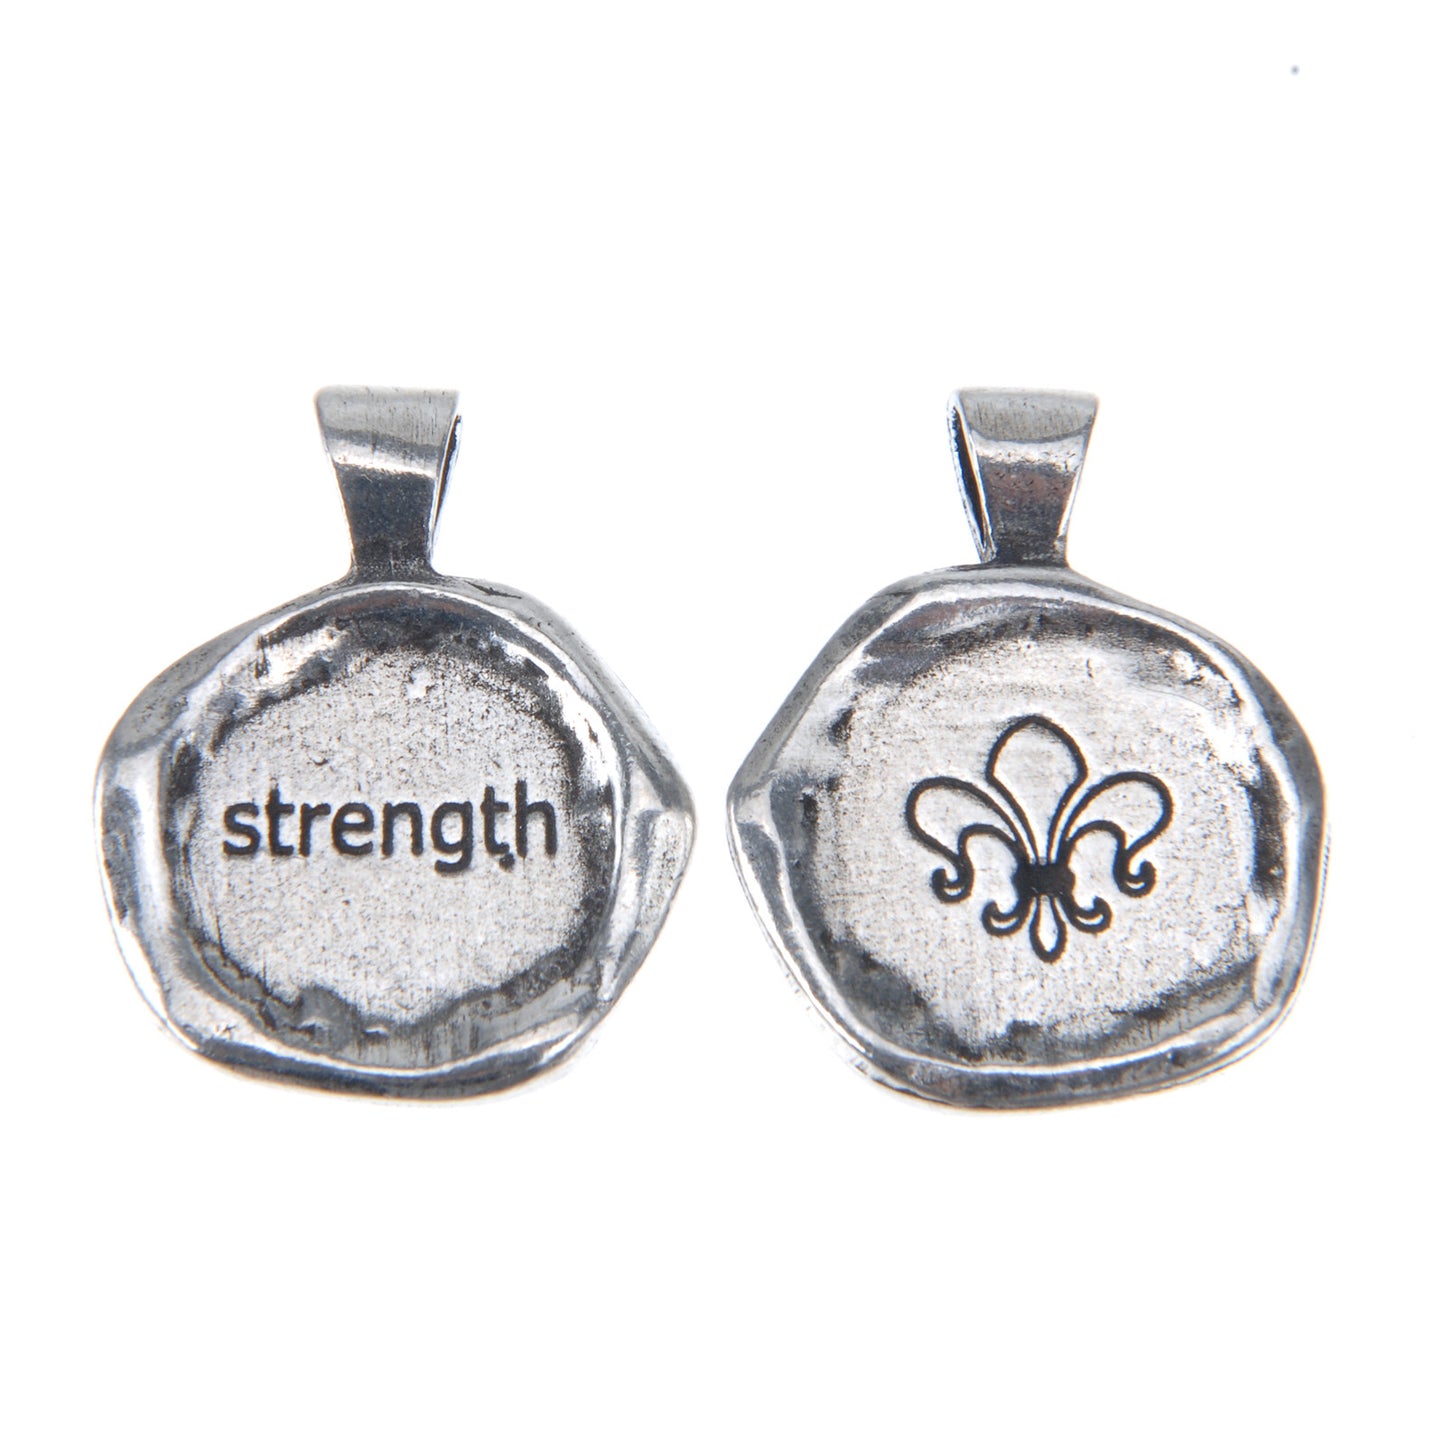 Strength Wax Seal front and back